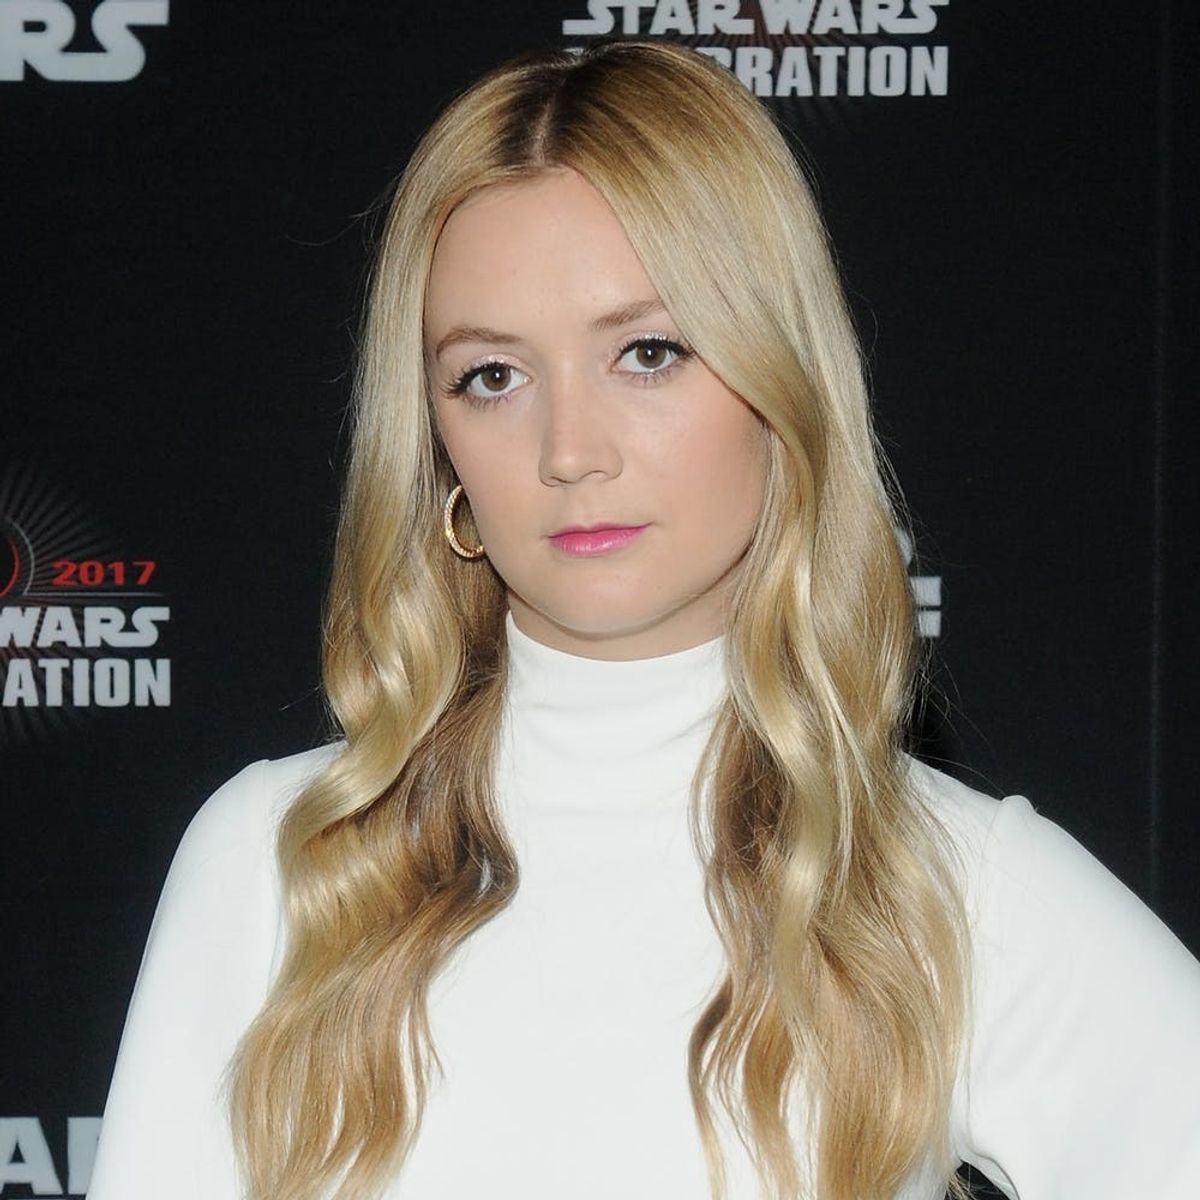 Billie Lourd Just Paid Tribute to Her Late Mother in the Most Stylish Way Possible